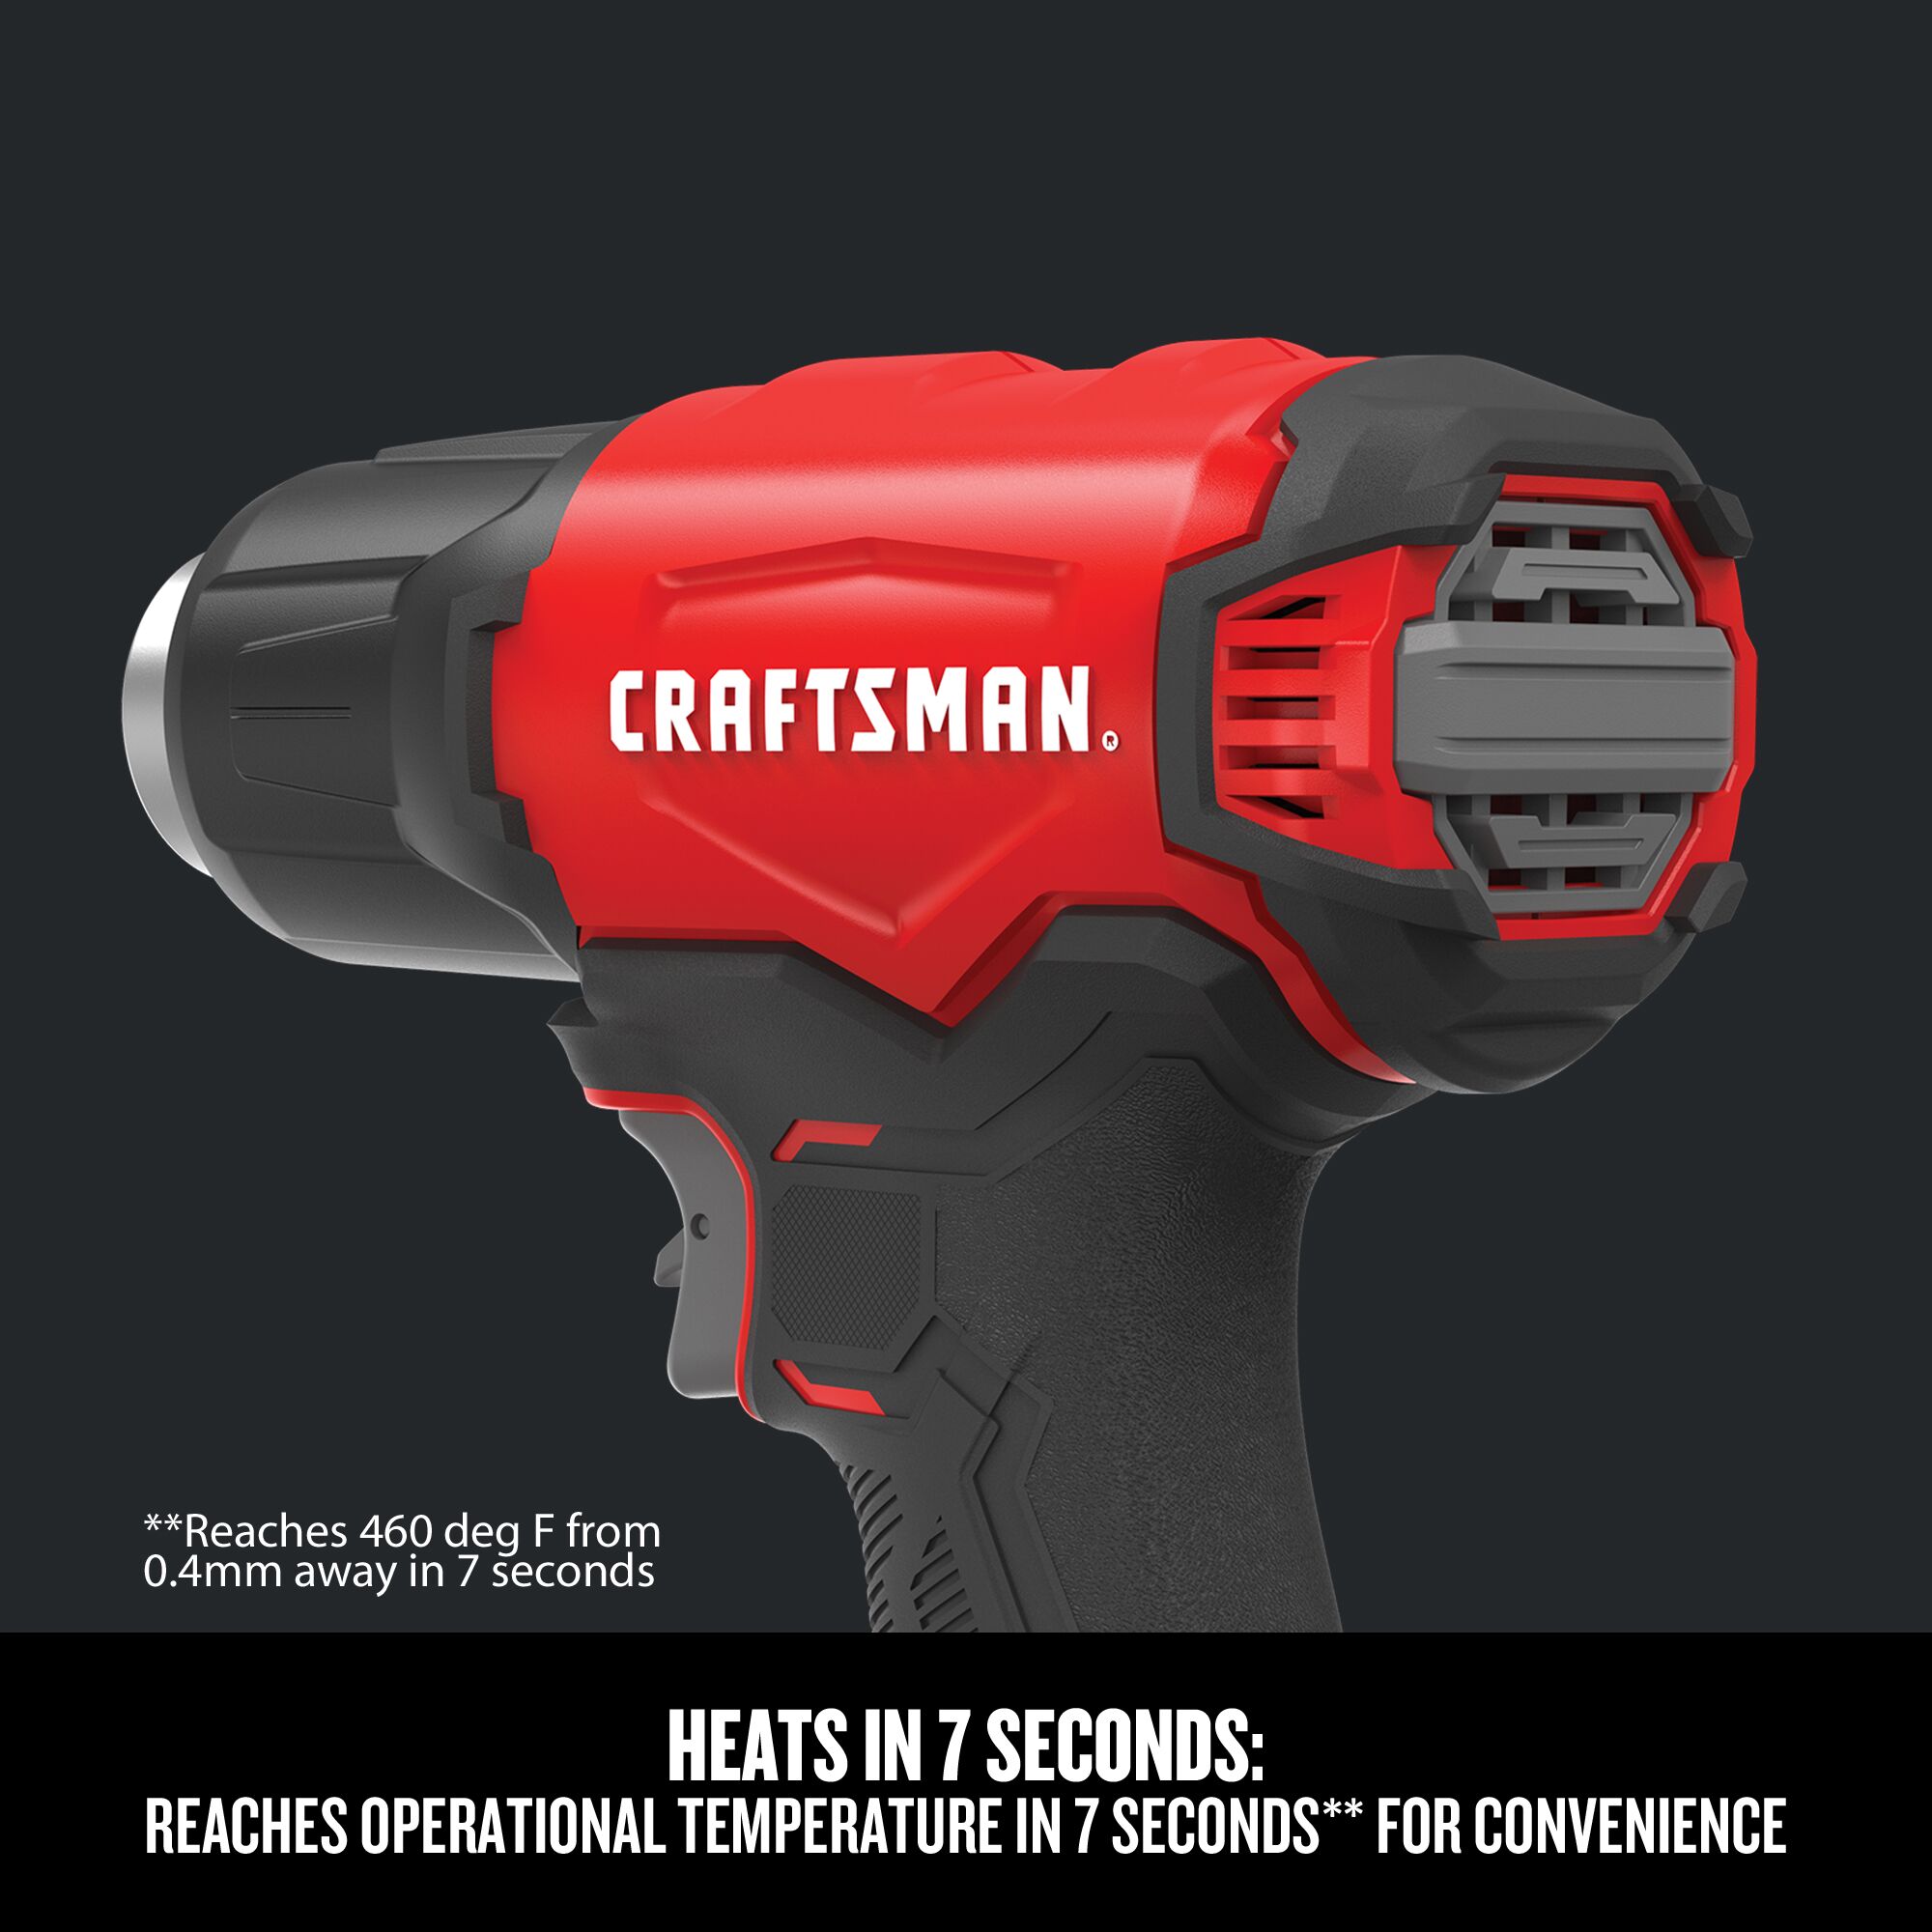 Graphic of CRAFTSMAN Heat Gun highlighting product features